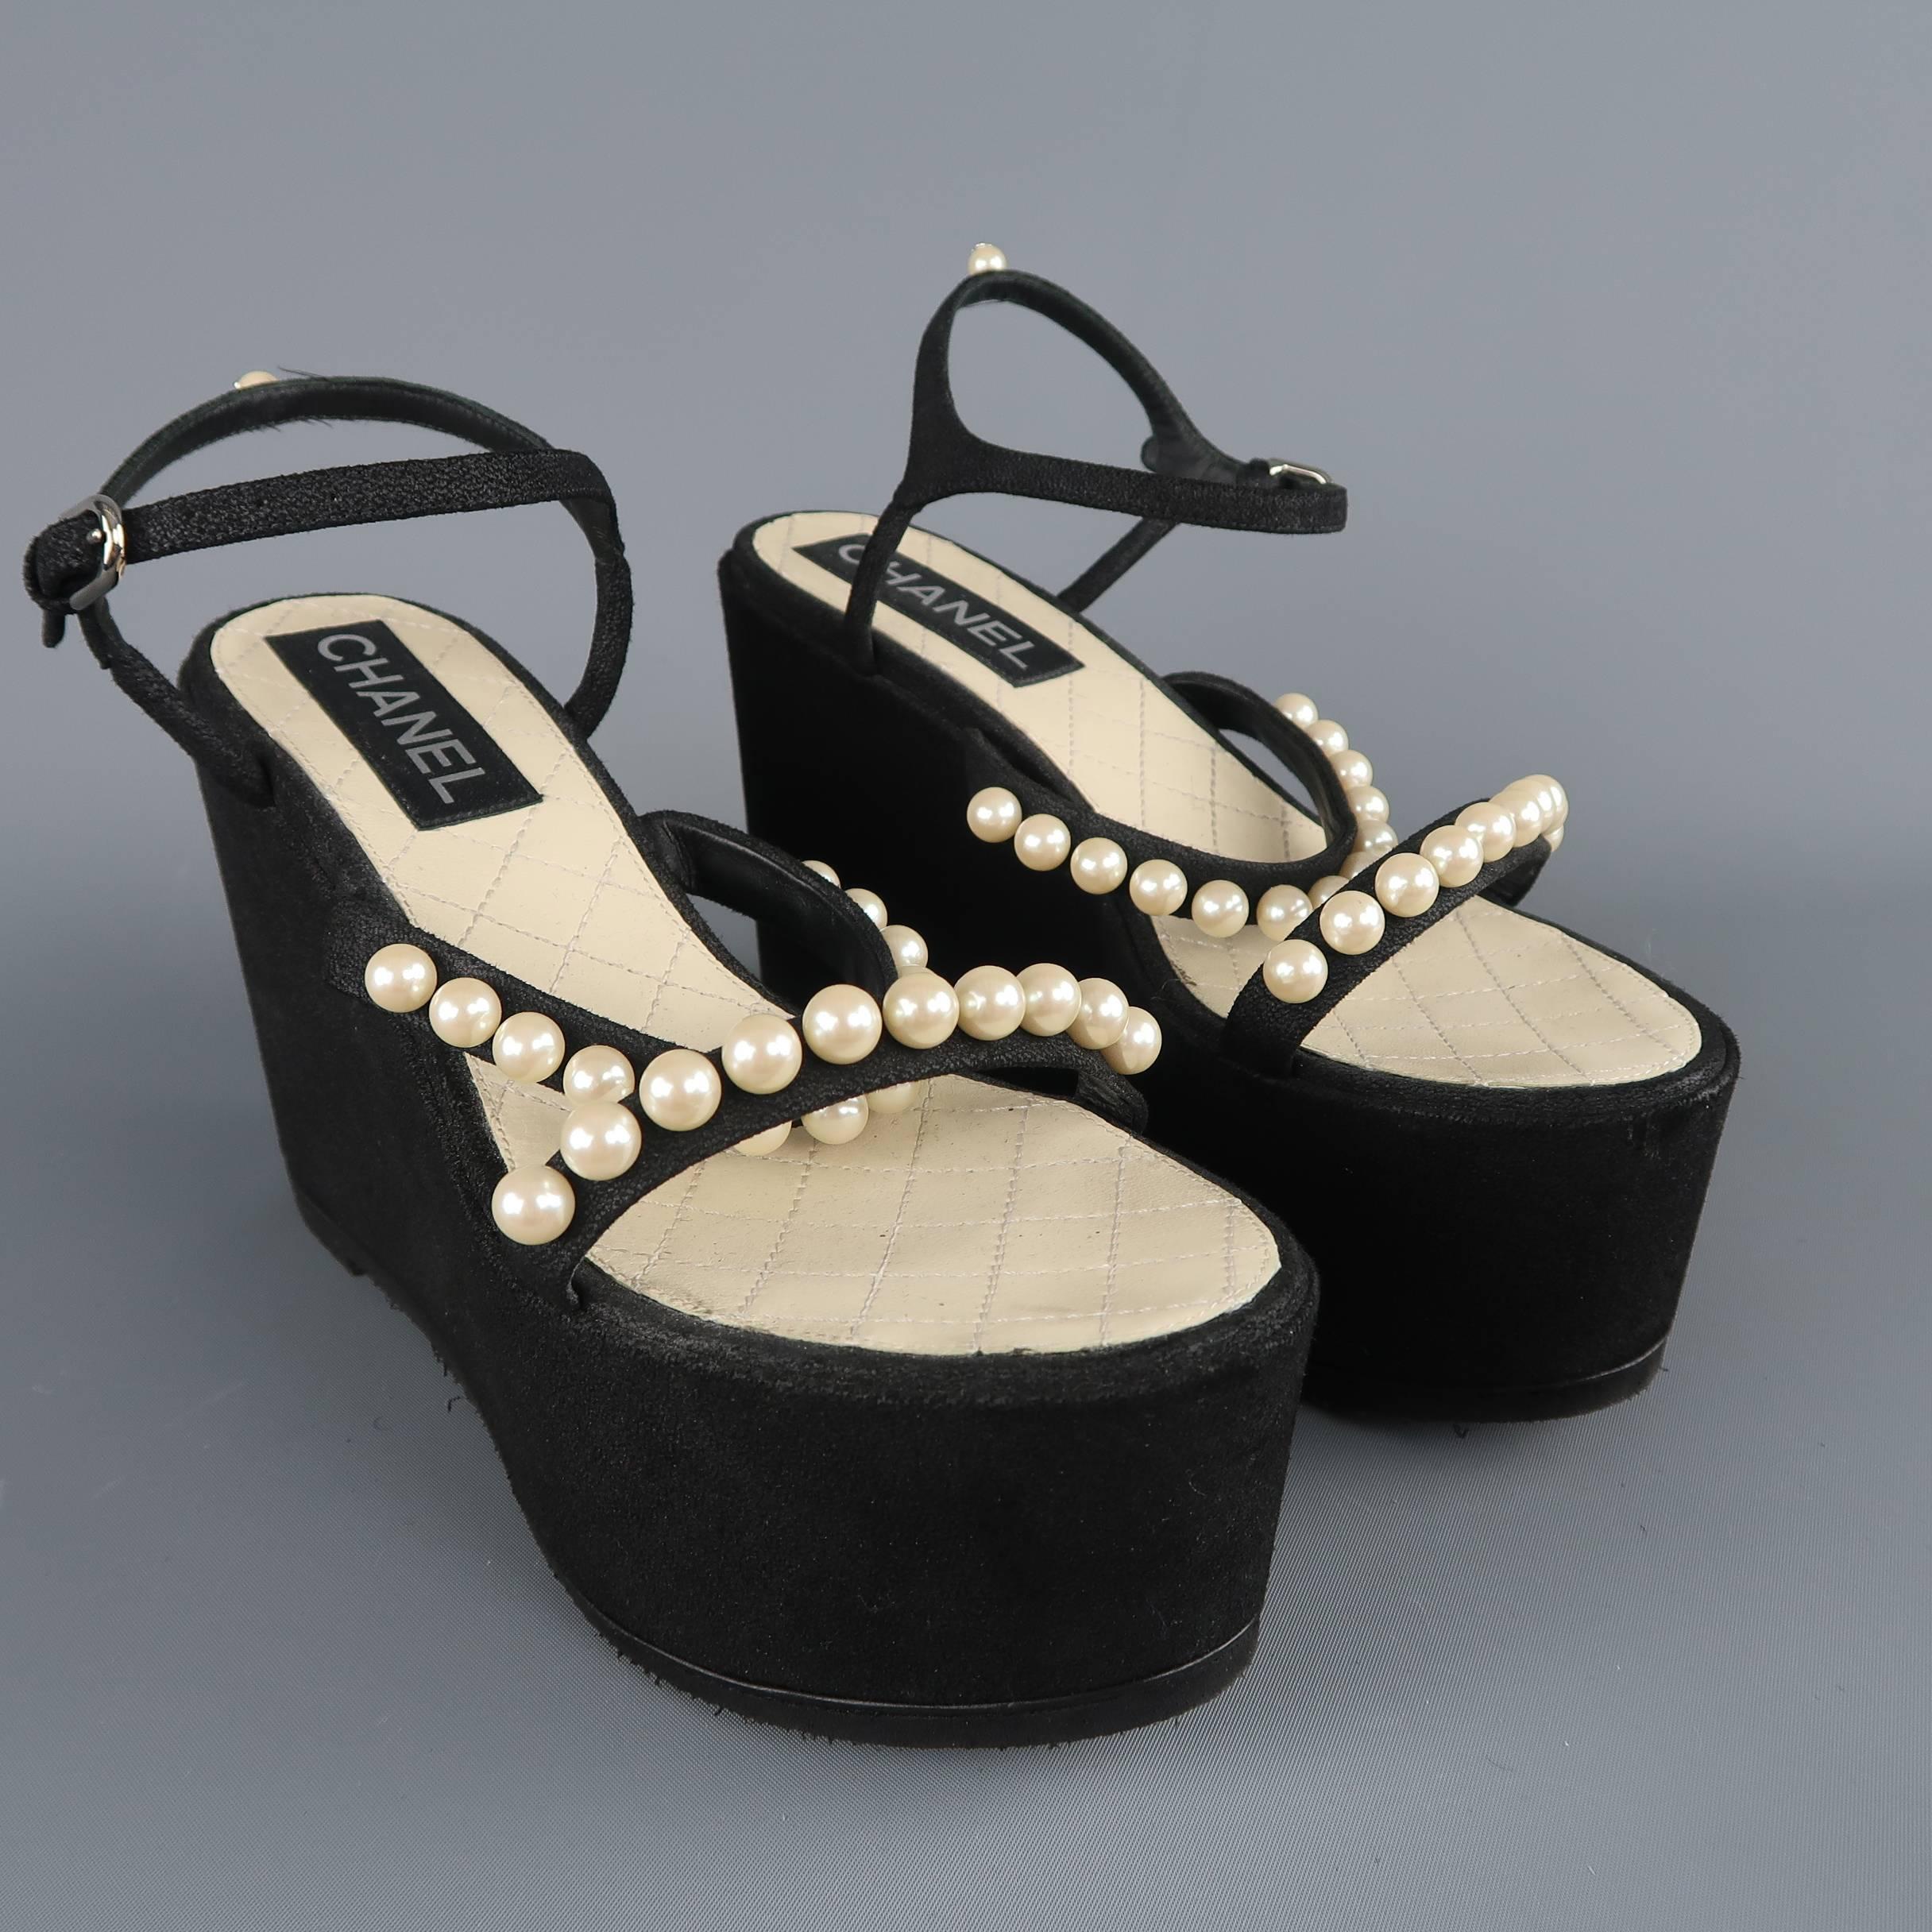 Chanel Spring 2014 sandals come in black suede and feature two toe straps with faux pearl embellishments, thick platform wedge sole, and ankle harness with CC pearl back. Vibram sole added. Made in Italy.
 
Excellent Pre-Owned Condition.
Marked: (no